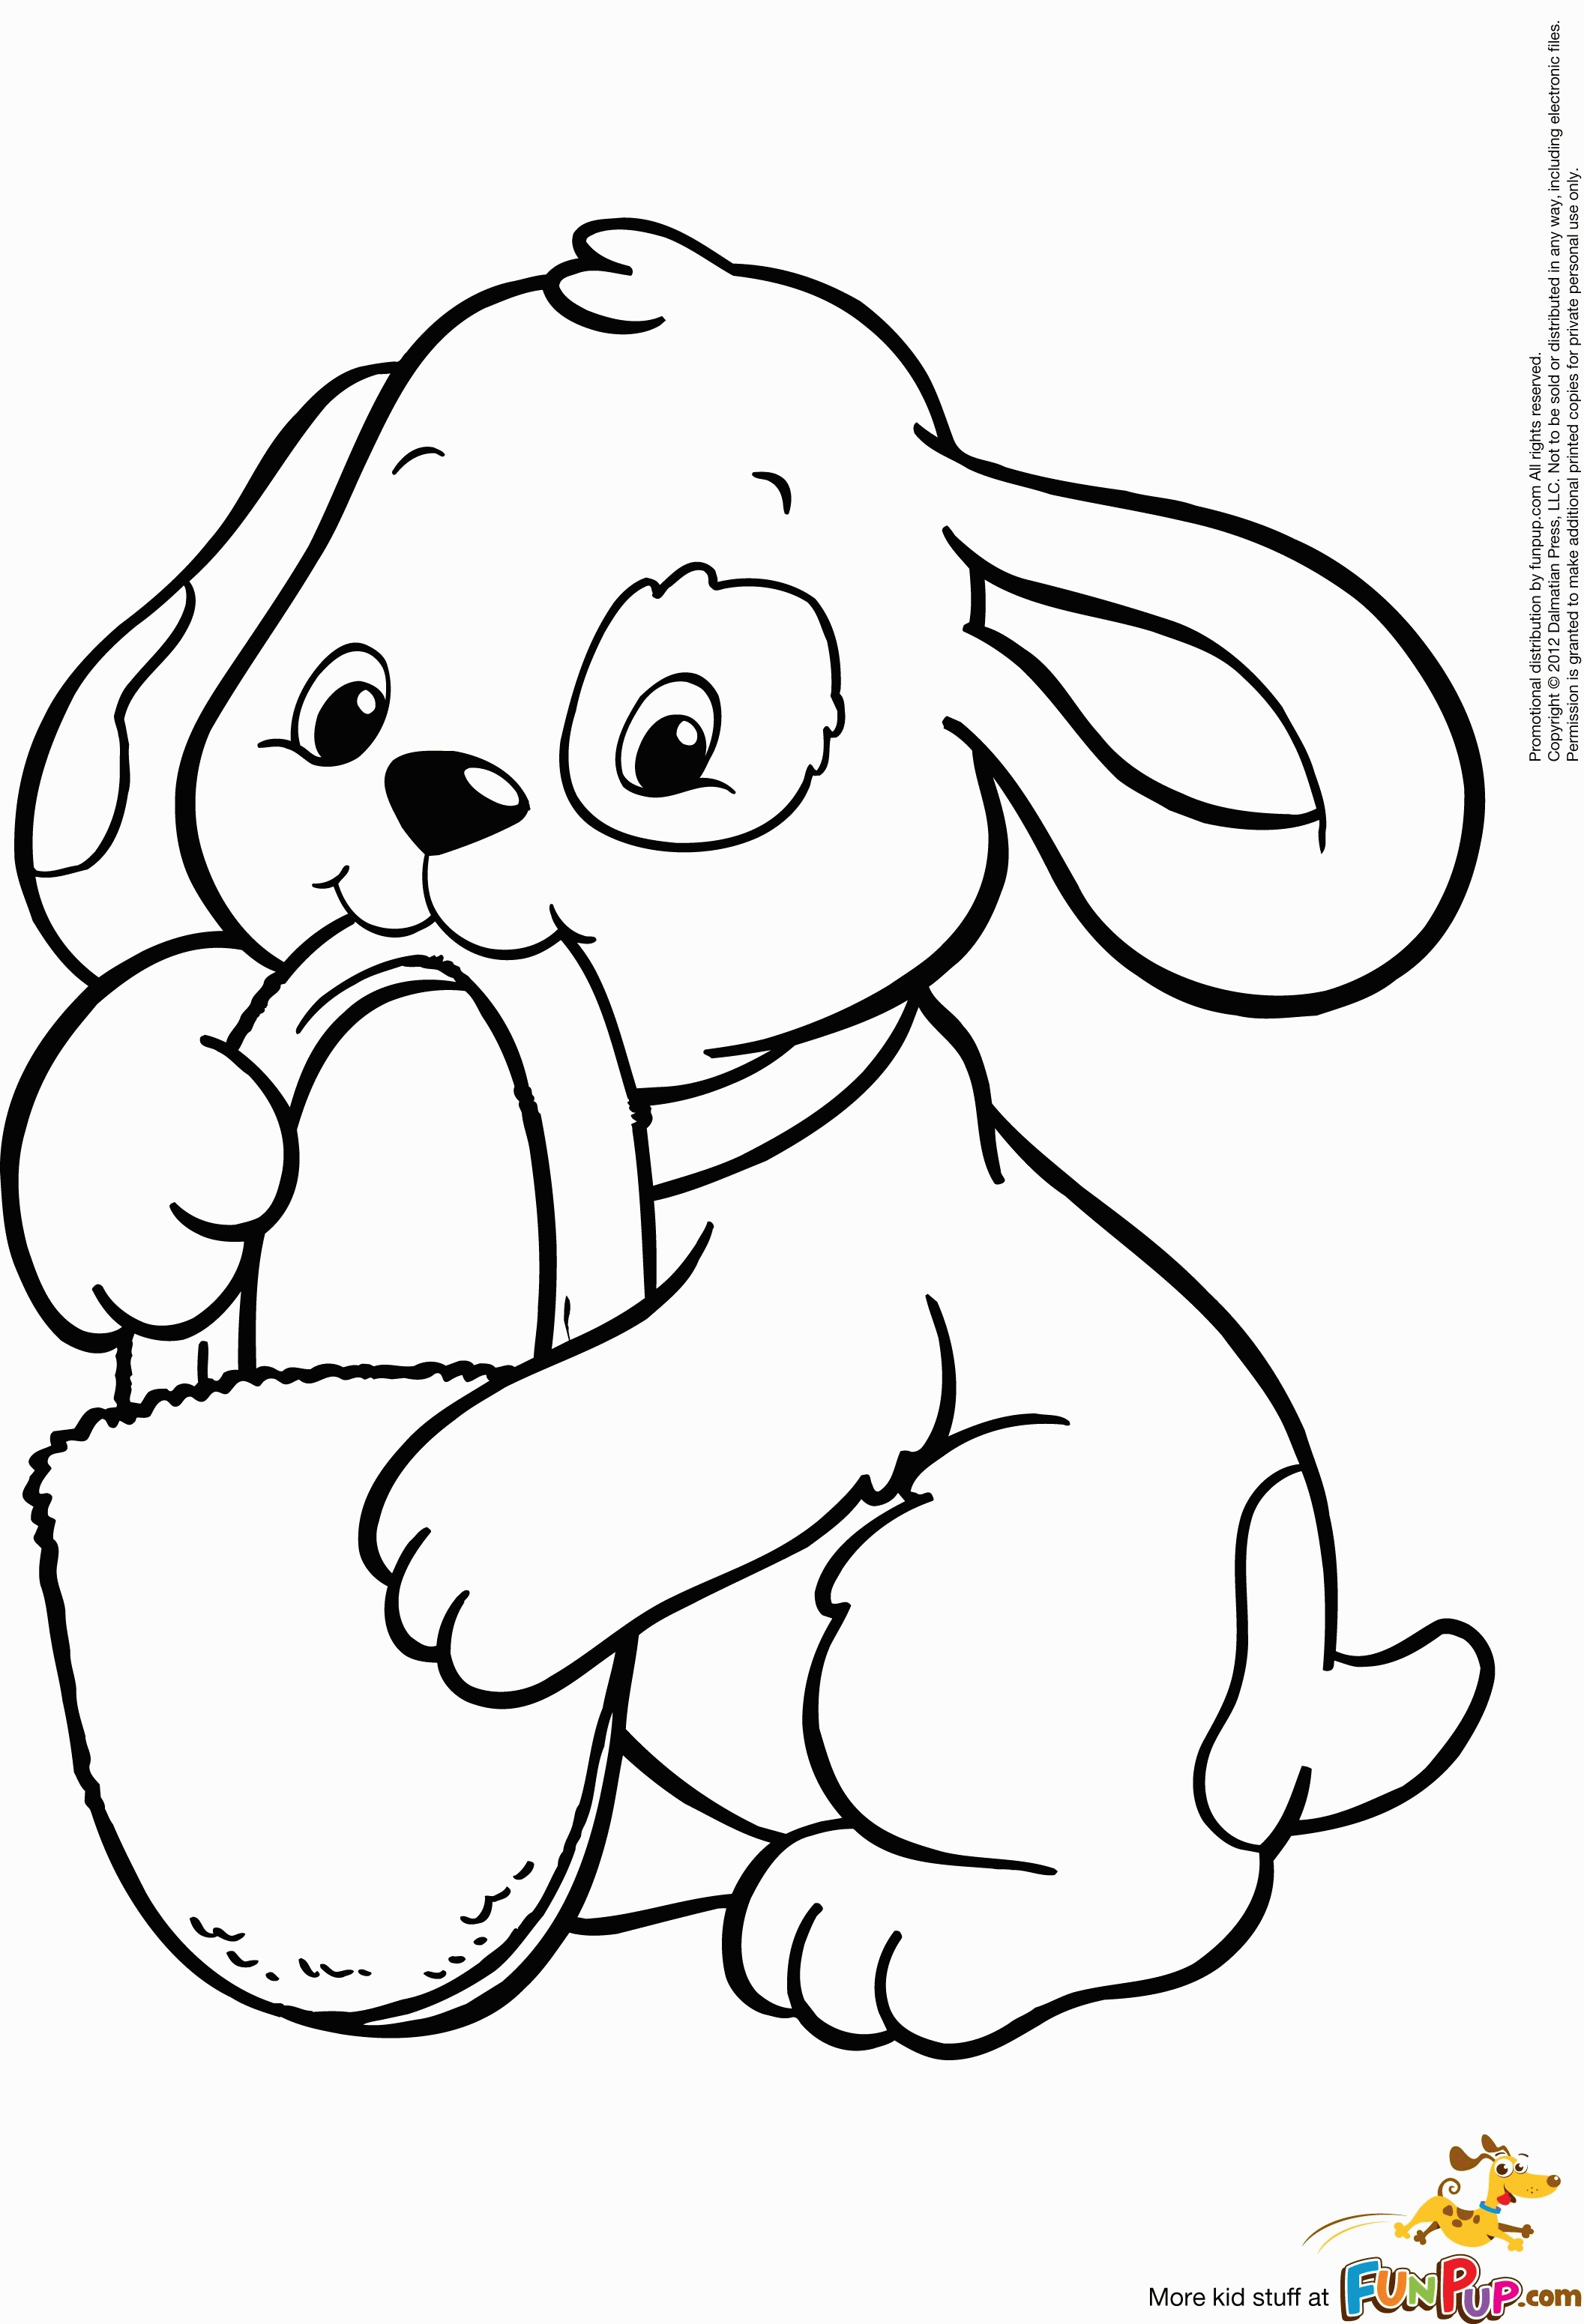 Puppy Colouring Pages Online Puppy Coloring Page Puppy Coloring ...